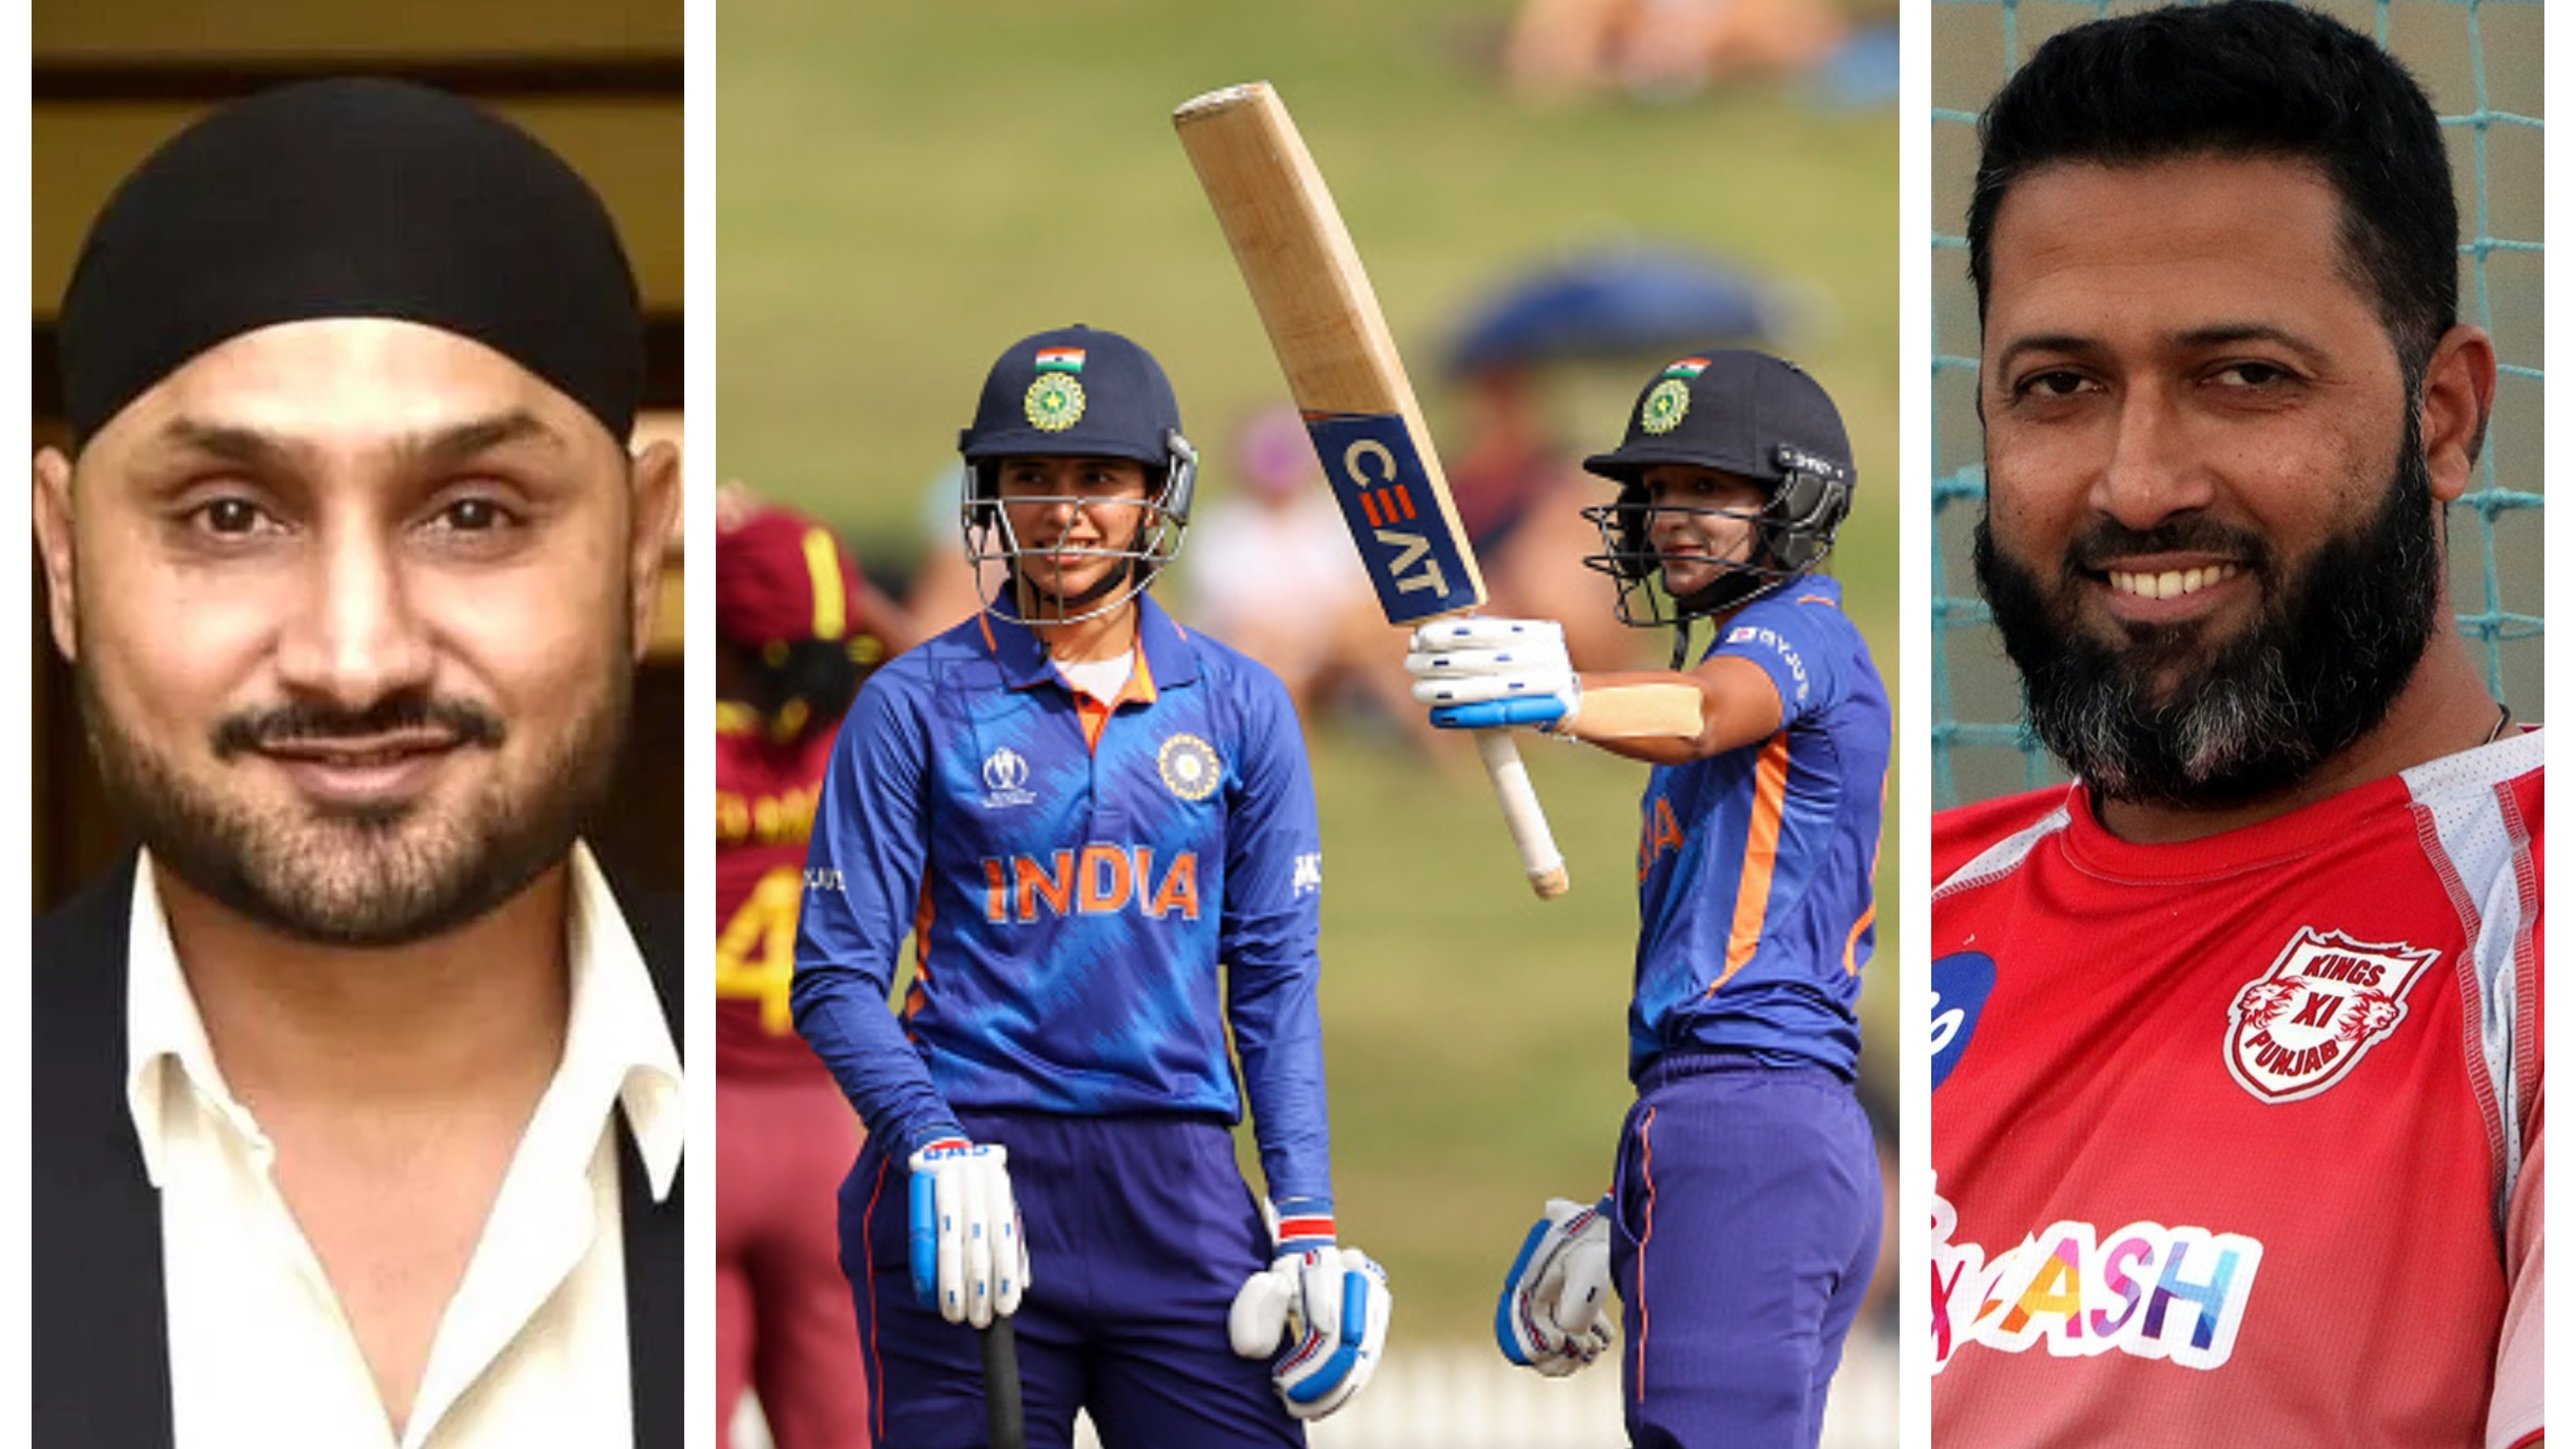 CWC 2022: Cricket fraternity reacts as Mandhana, Harmanpreet lead India’s resounding win over West Indies